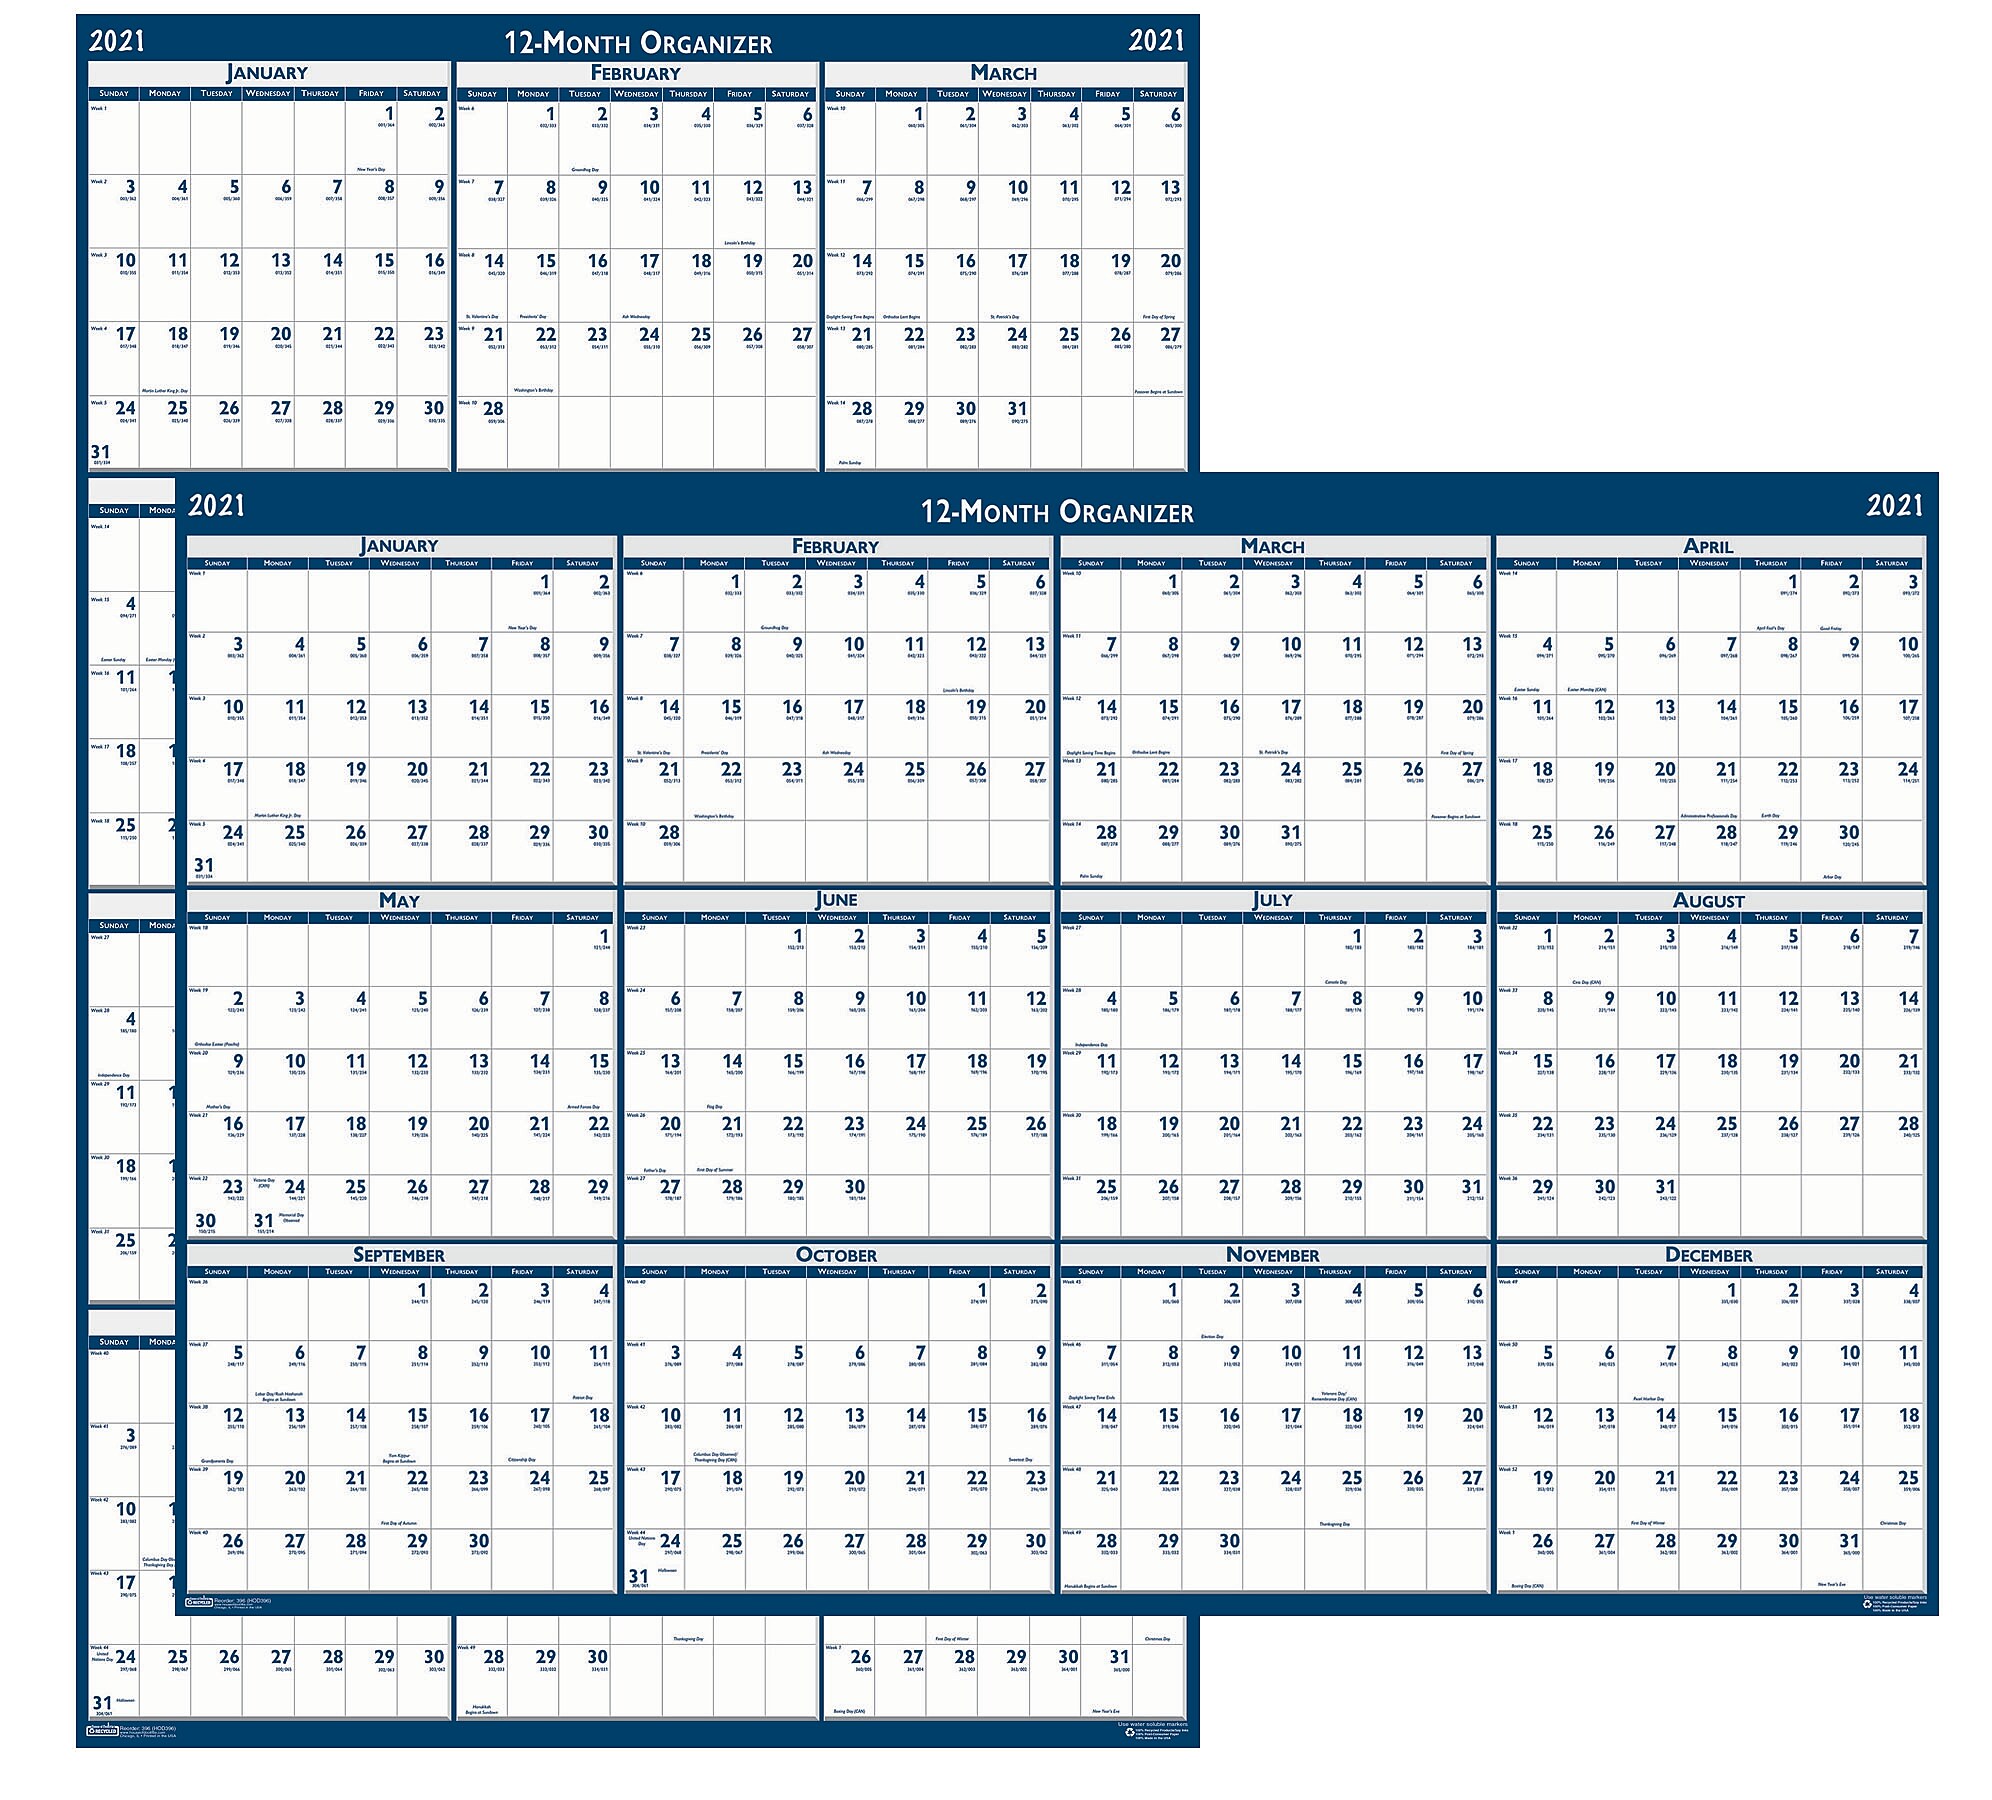 Dry Erase Wall Planner by AT-A-GLANCE PM83-550-21 2021 Erasable Calendar Large Reversible Dreams 24 x 36